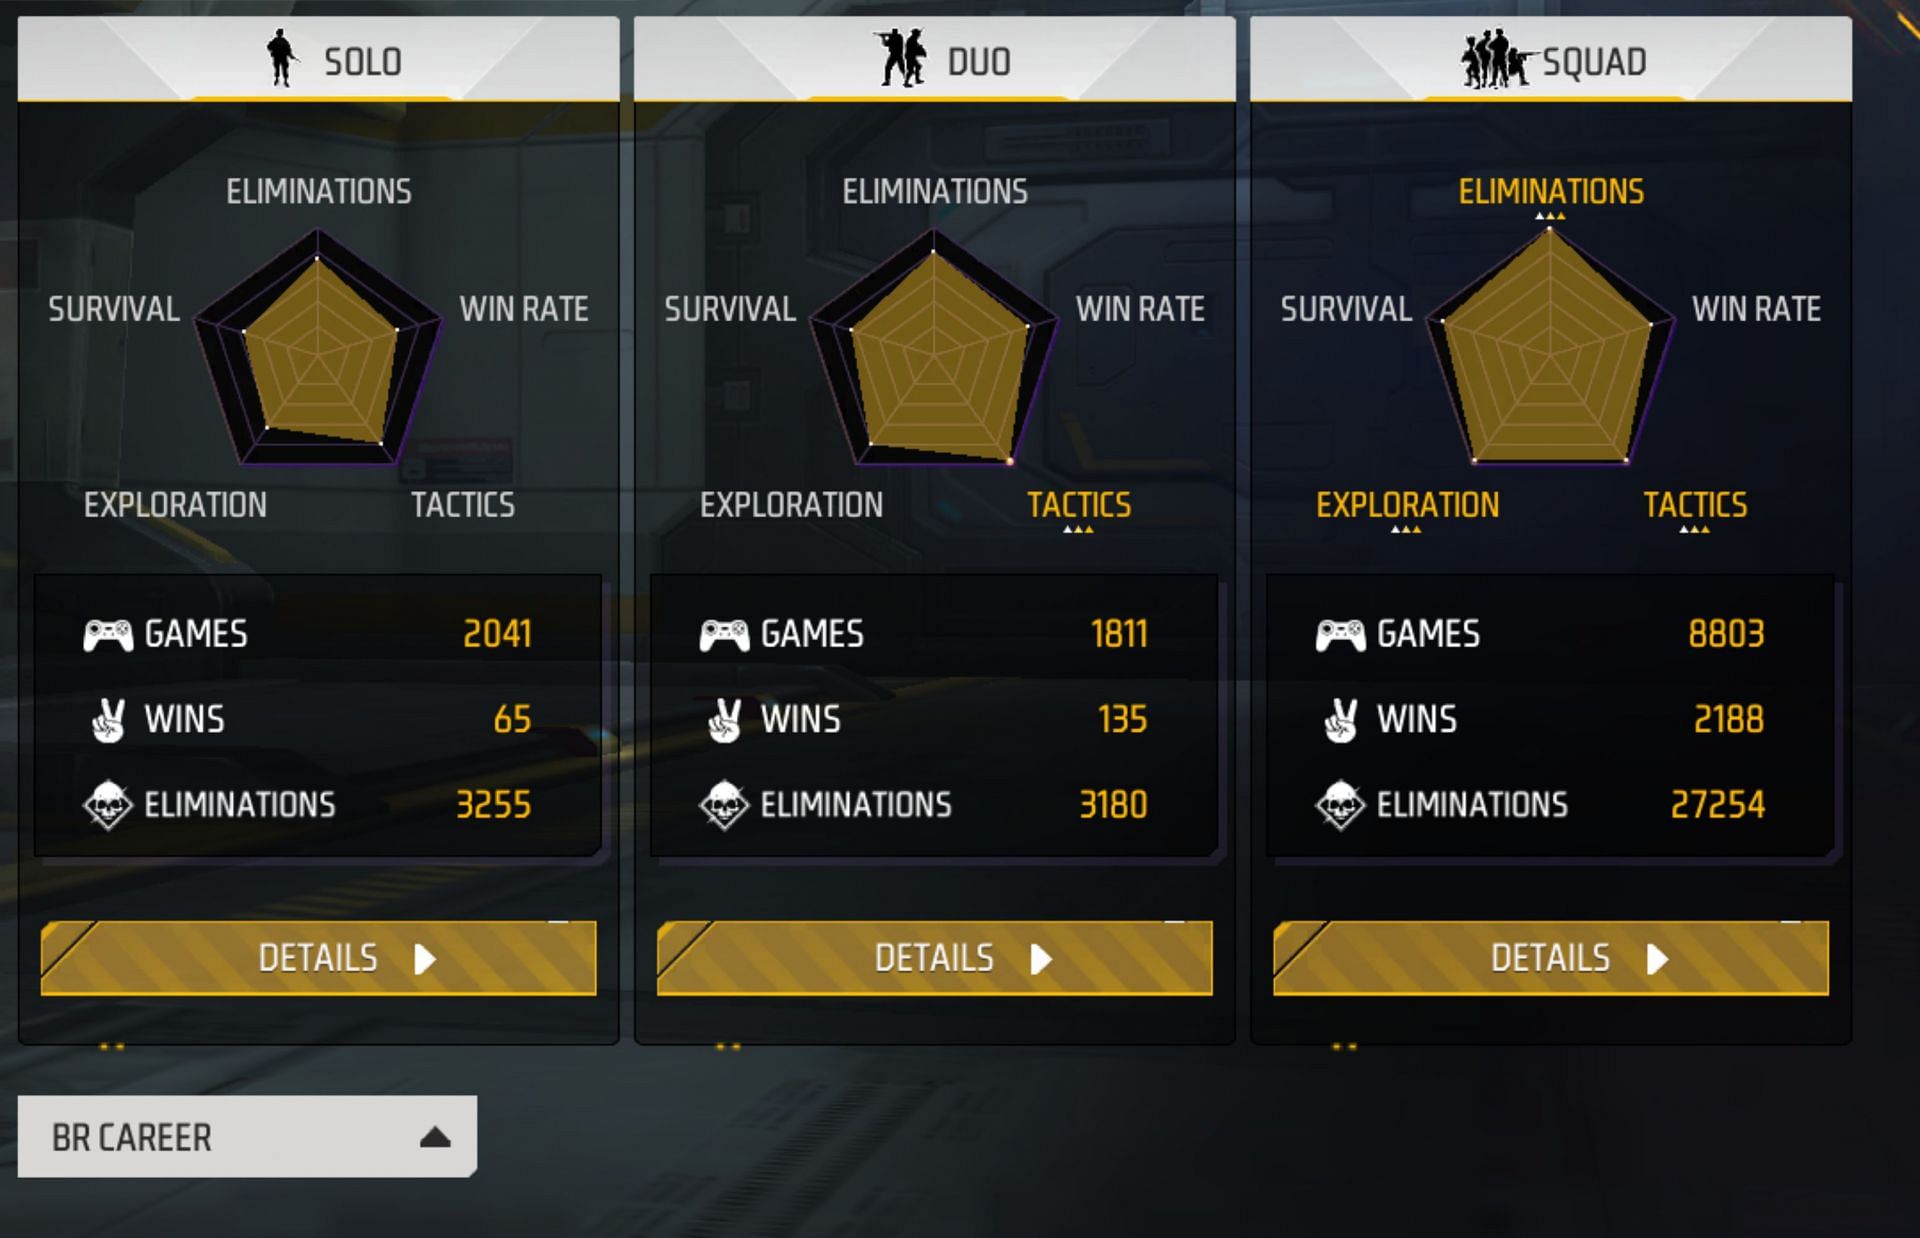 Facto Gamer has 27k frags in the squad matches (Image via Garena)